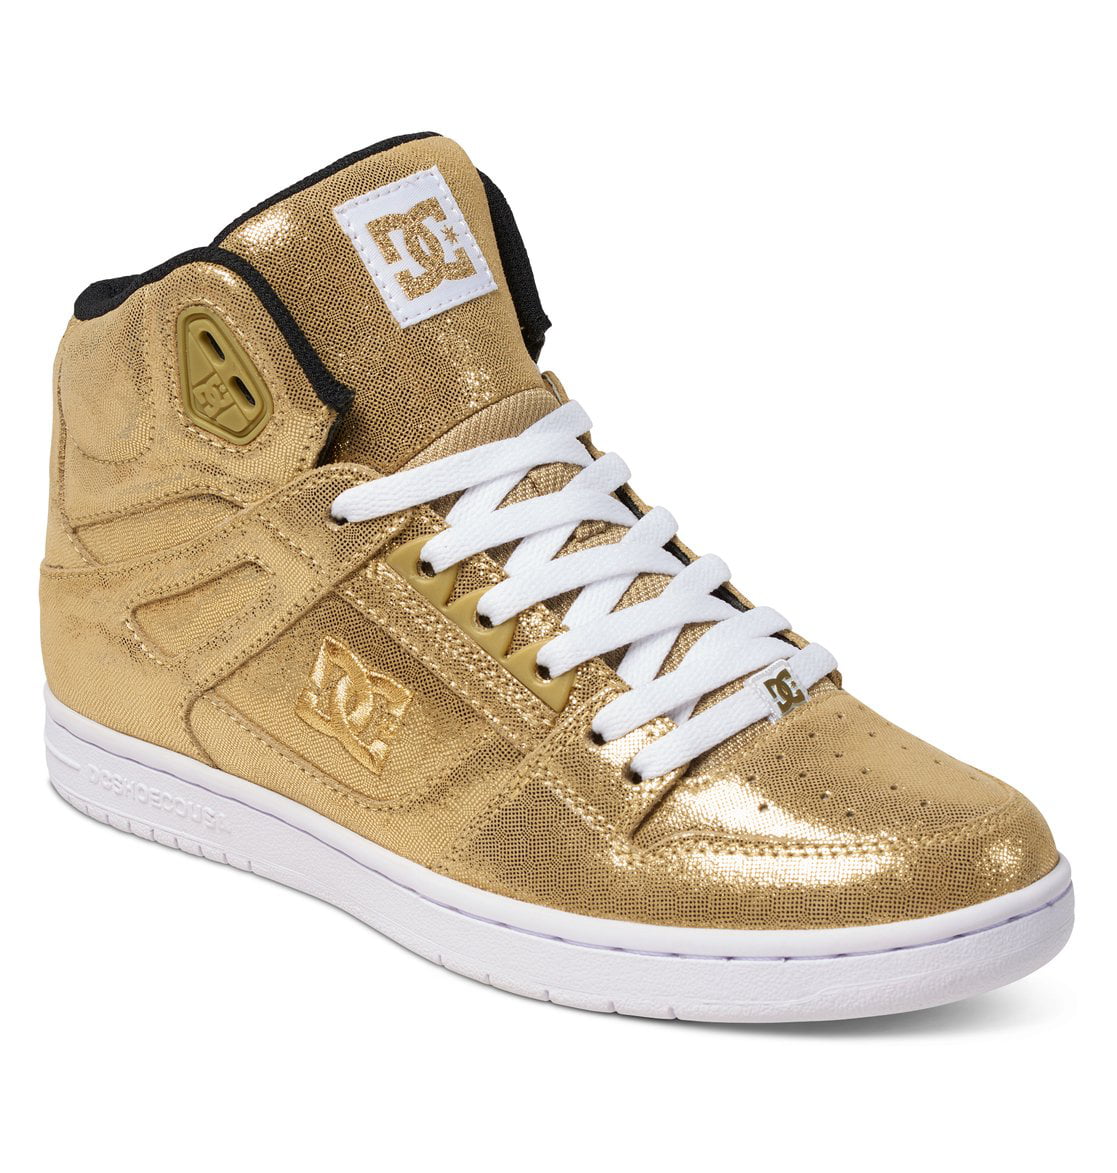 DC REBOUND TX Black Gold Youth shoes 